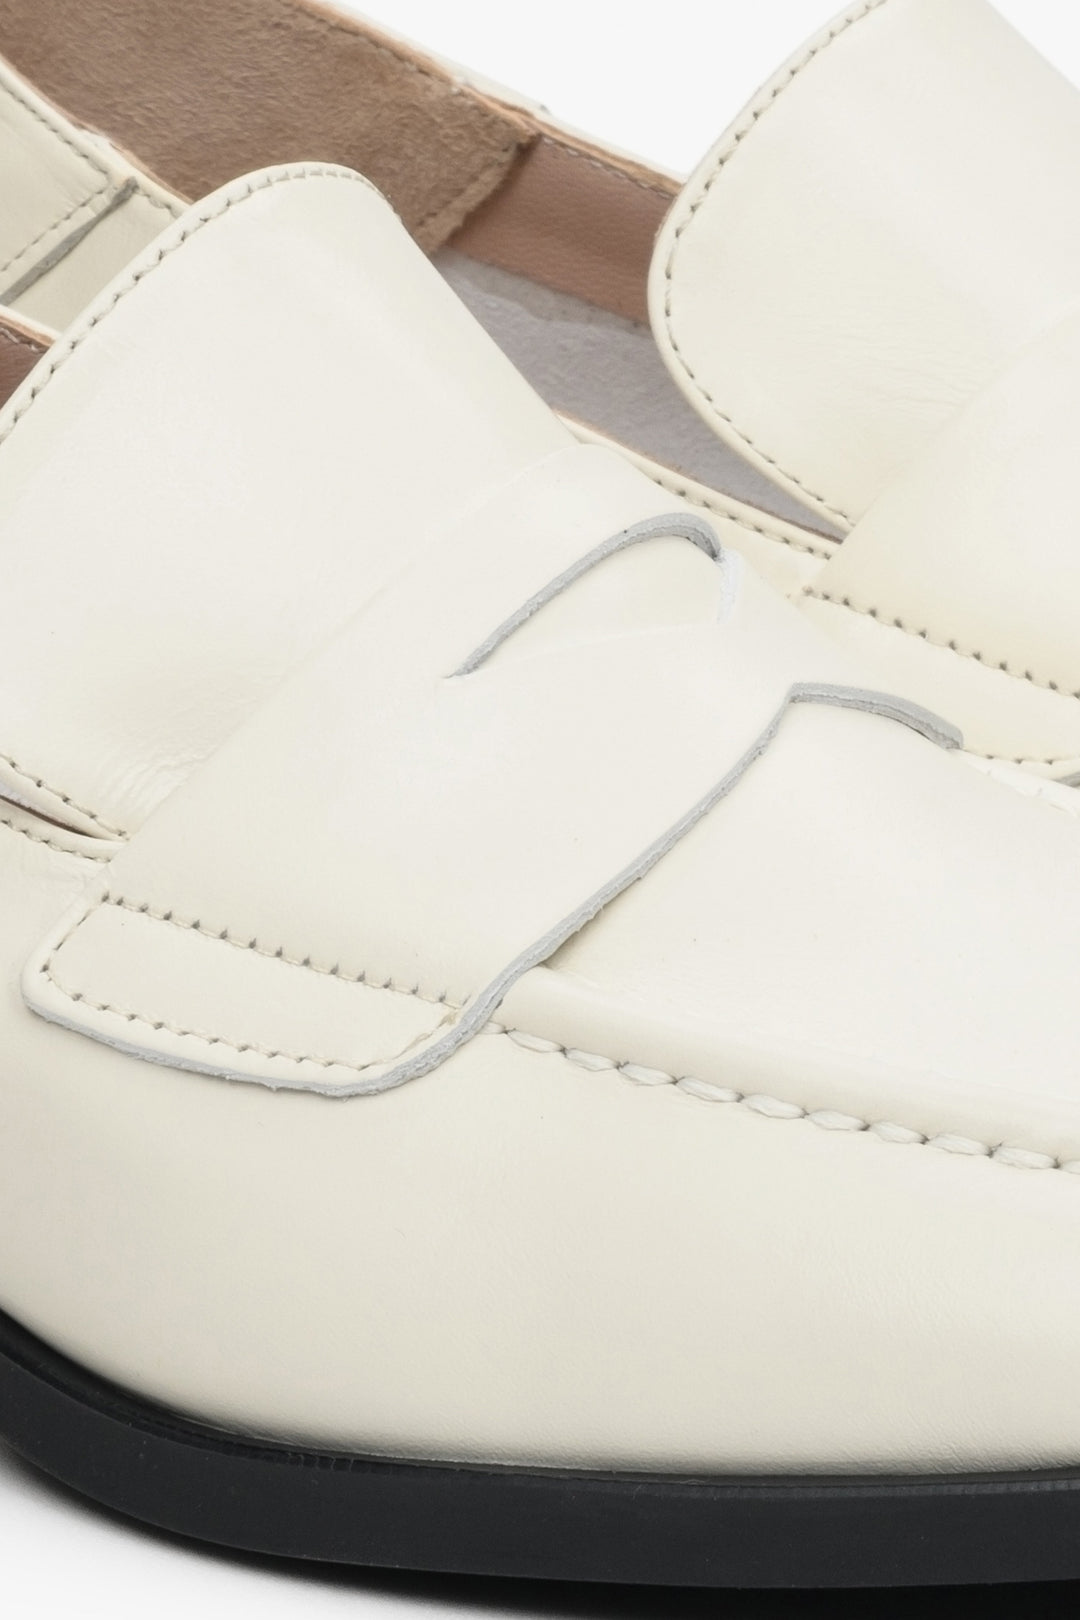 Women's white leather loafers by Estro - close-up on the stitching pattern.